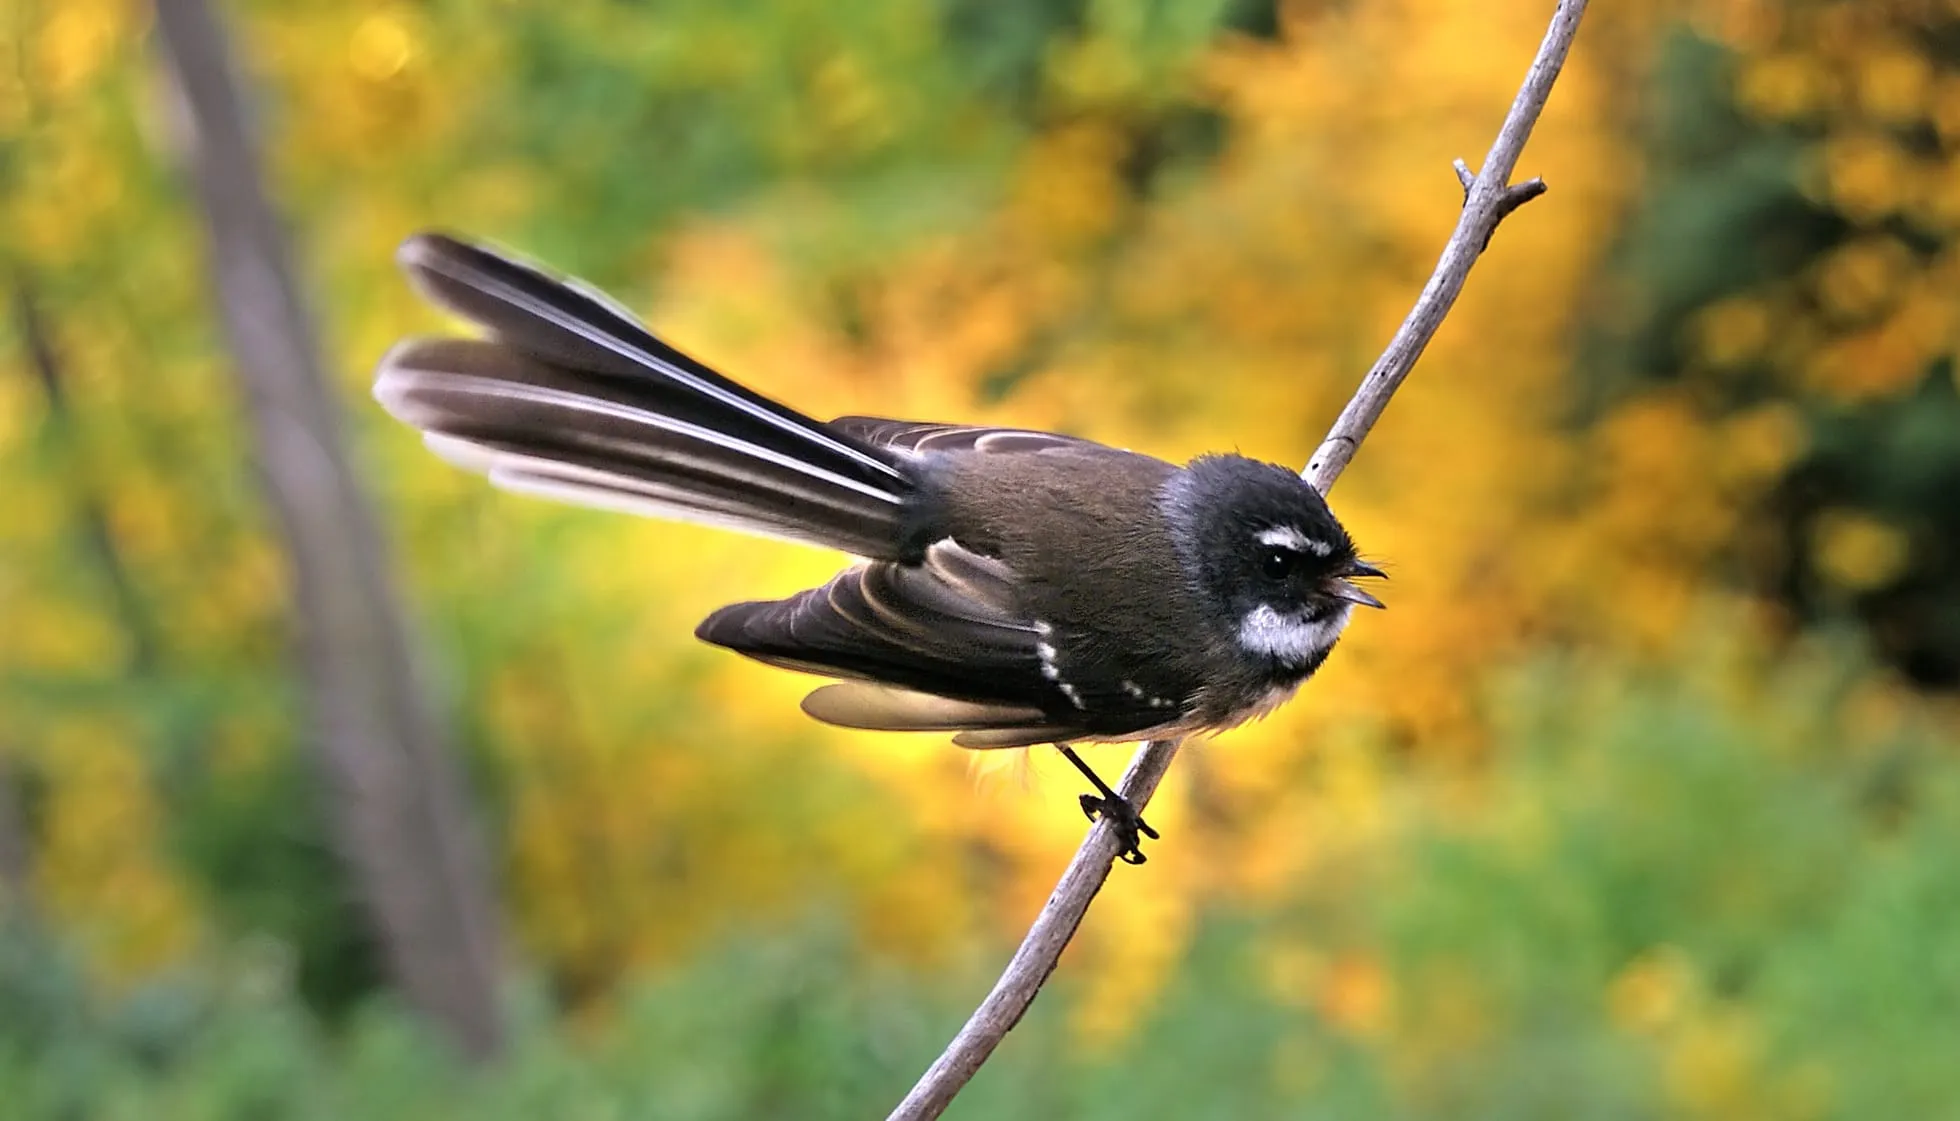 New Zealand Fantail perched on a twig